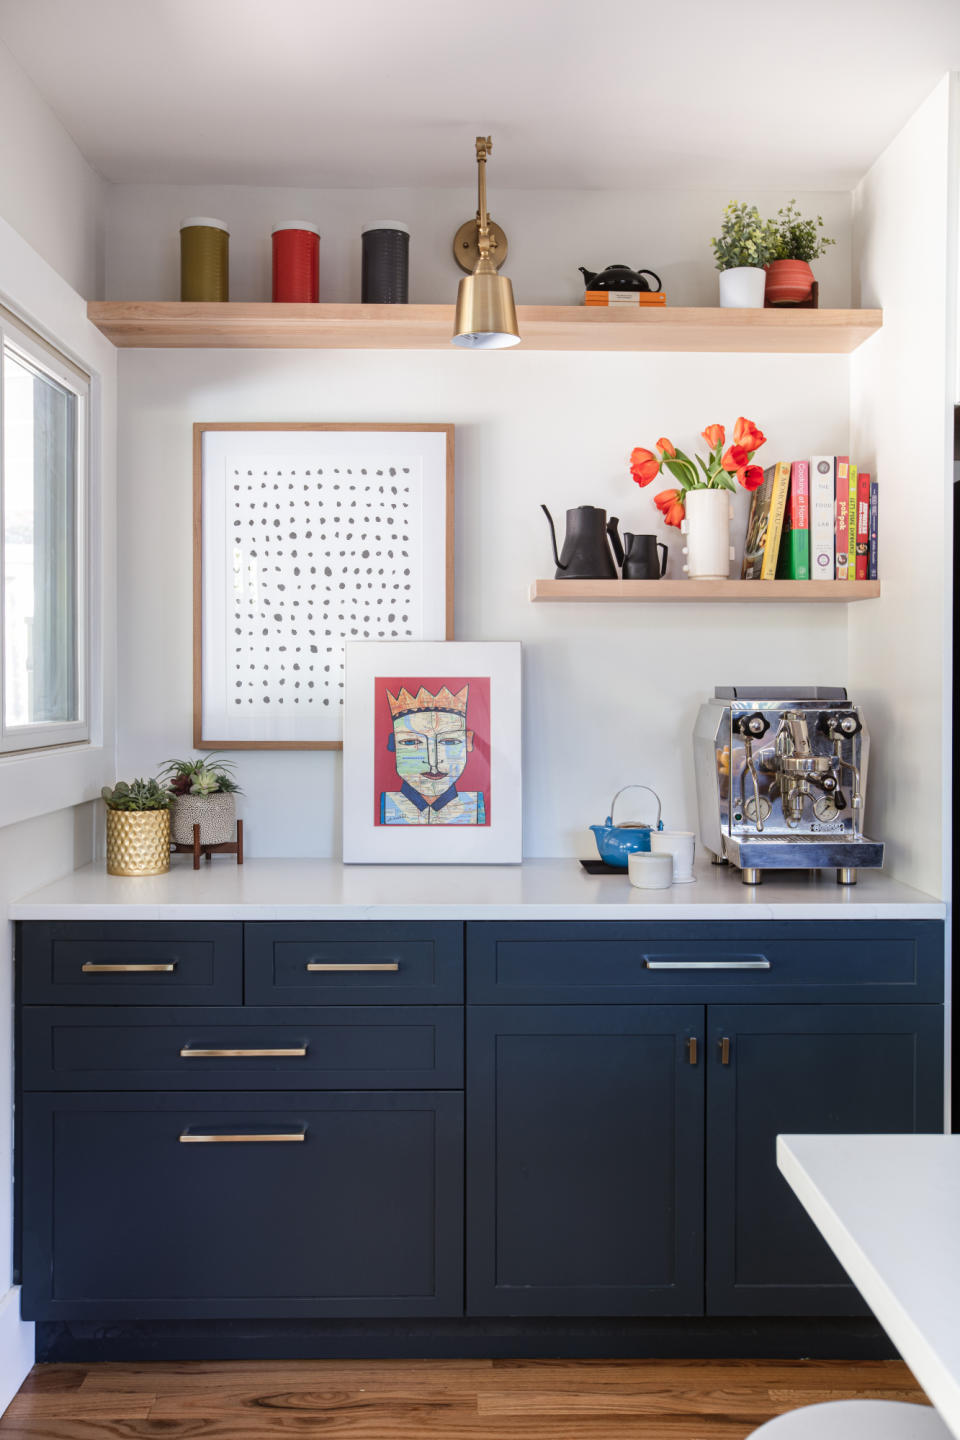 Kitchen nook with dark blue Shaker cabinets, white worktop, oak shelving and a brass wall light